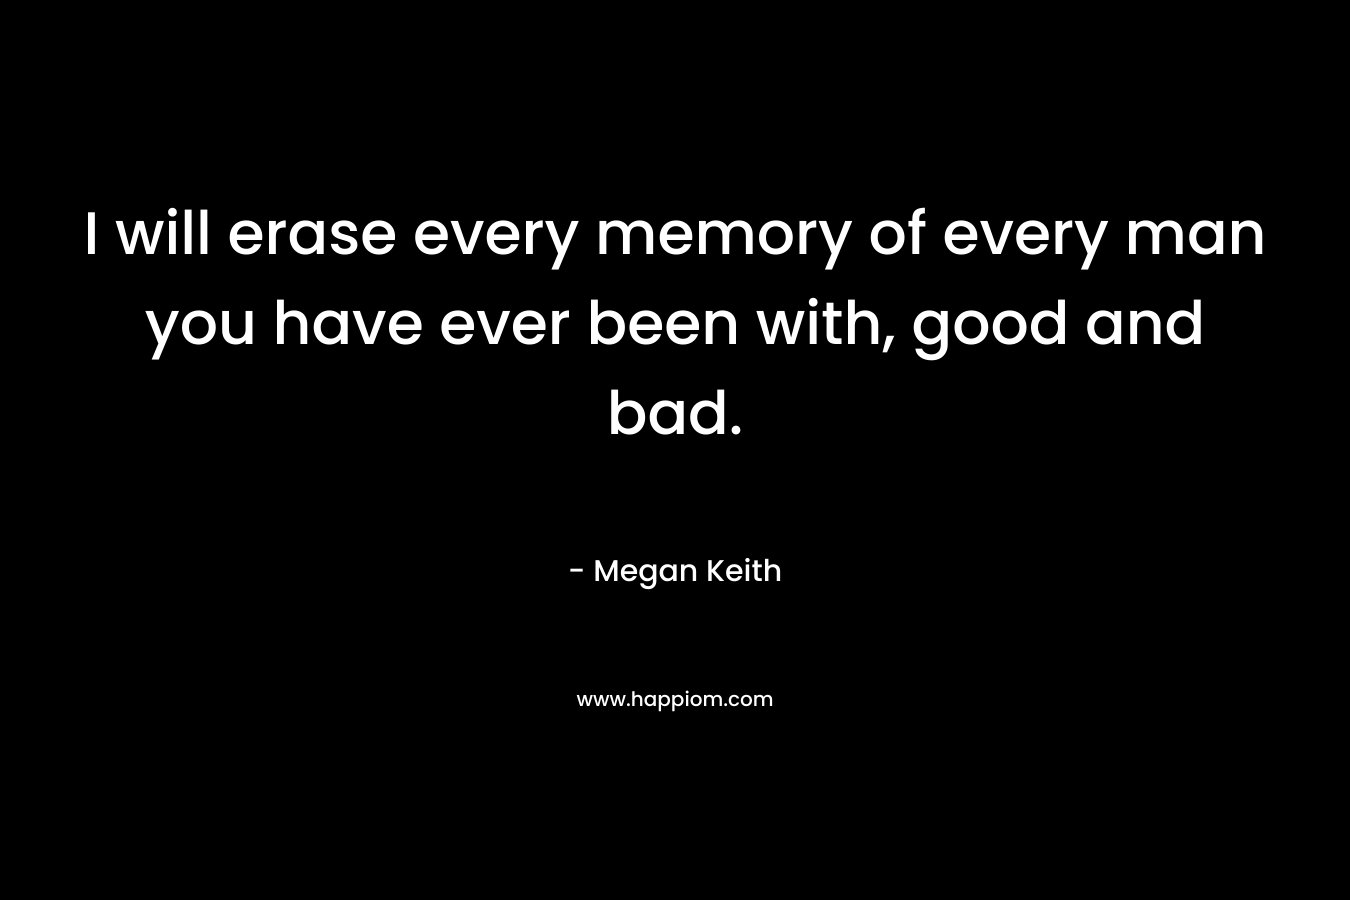 I will erase every memory of every man you have ever been with, good and bad. – Megan Keith